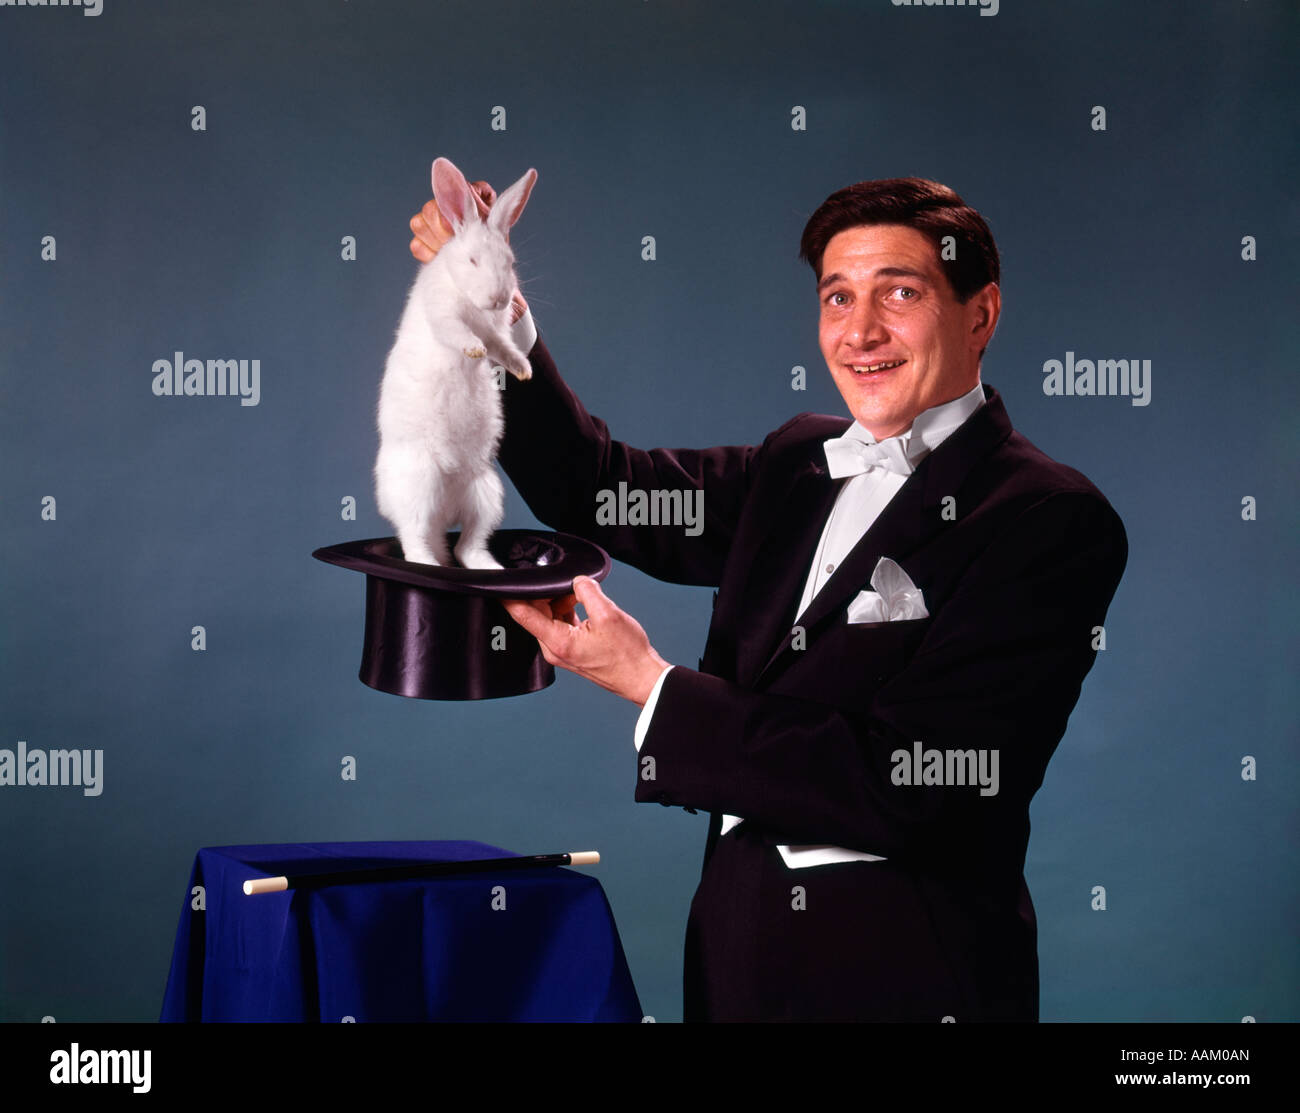 1960s 1970s MAN MAGICIAN TUXEDO PULLING RABBIT OUT OF TOP HAT MAGIC ILLUSION SLEIGHT OF HAND TRICK Stock Photo